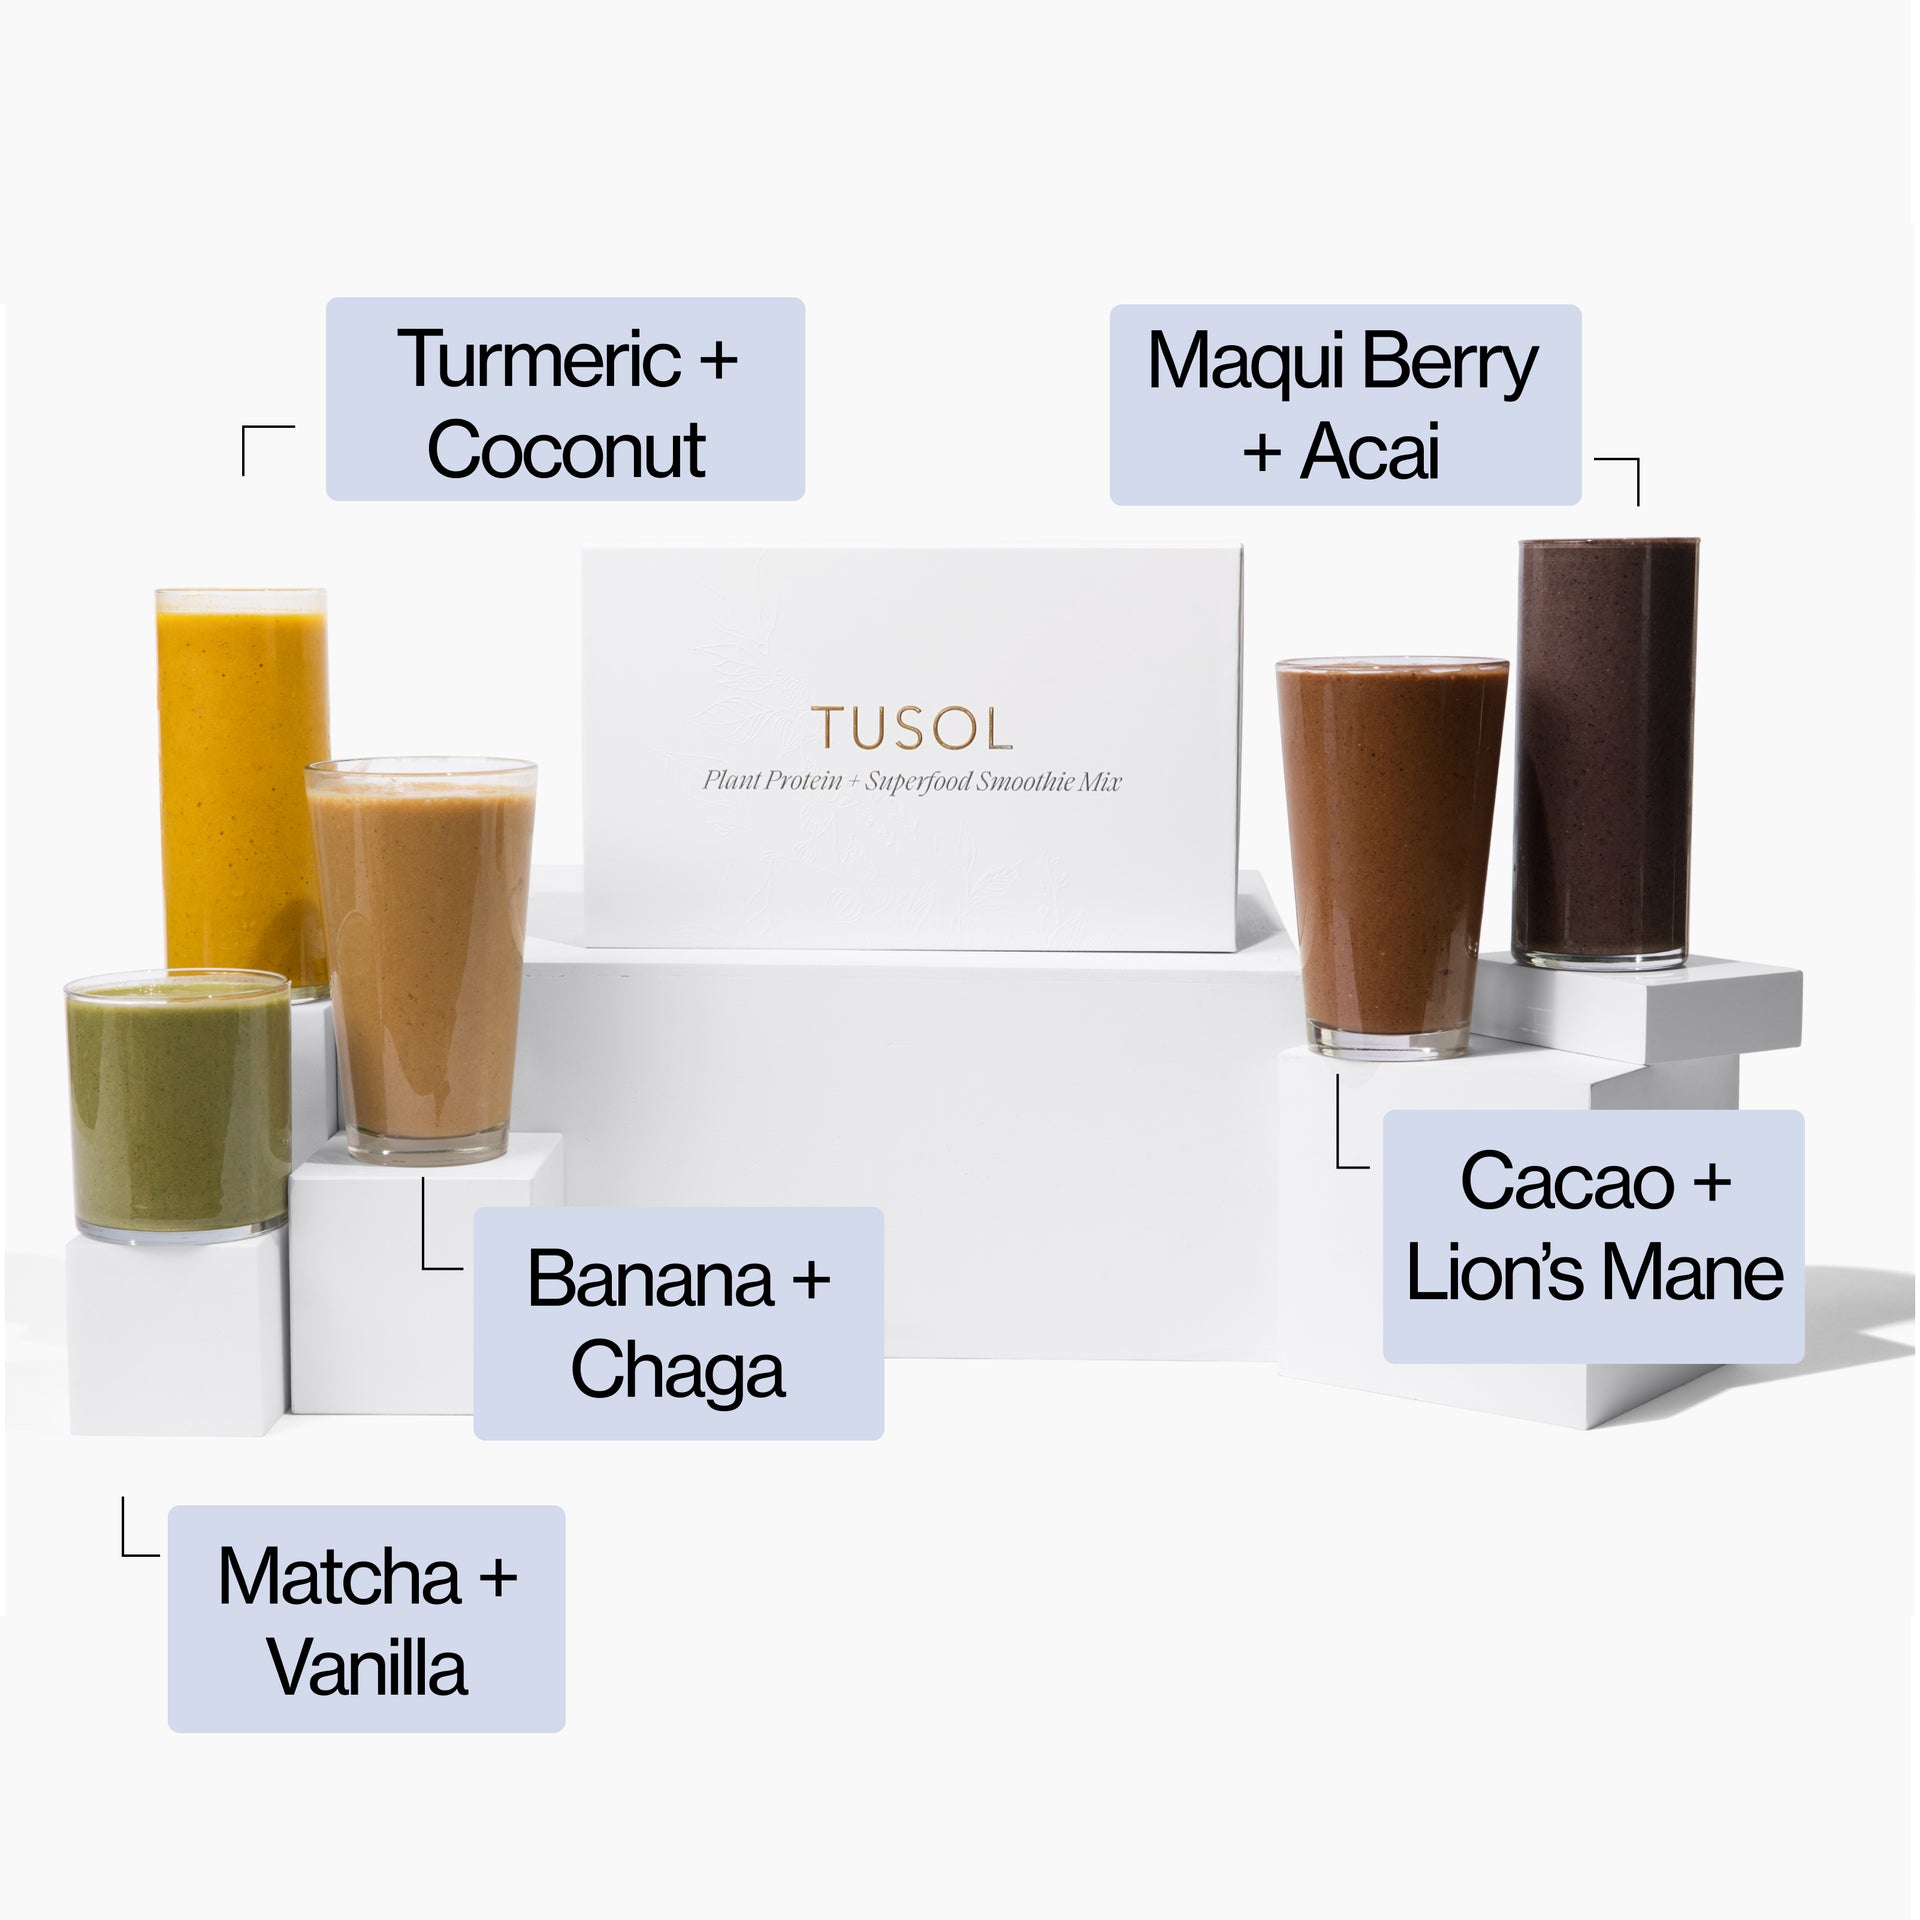 TUSOL Organic Plant Protein + Superfood Smoothie Mix